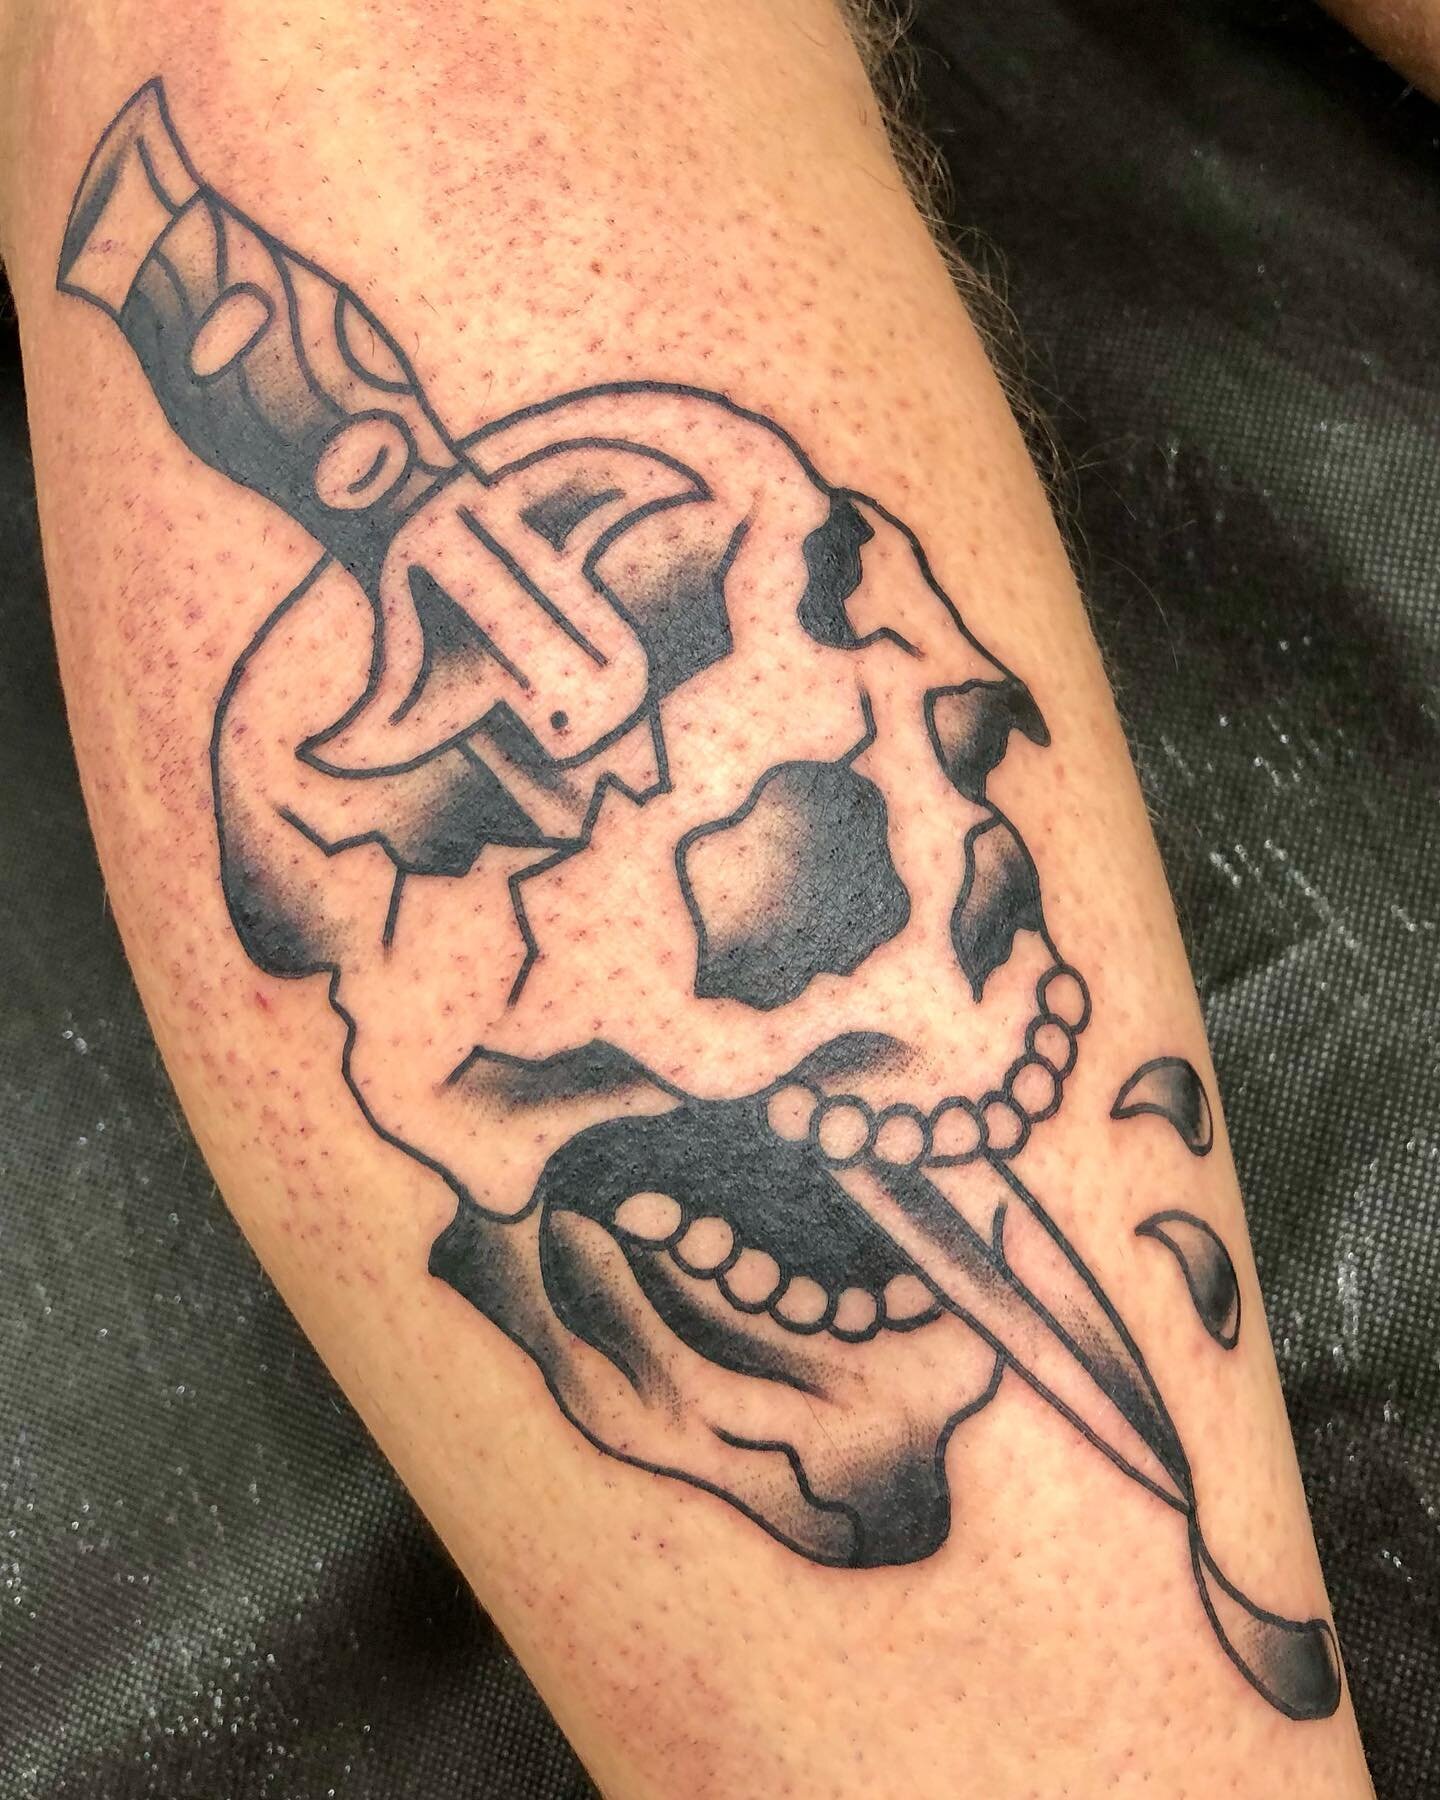 Skull and Switchblade made for Samuel!! Thank you so much mate!! 💀🔪🩸

Done at @progressiontattoo 💛

I&rsquo;ve got availability next week for tats!! Please message me with your cool ideas 😇